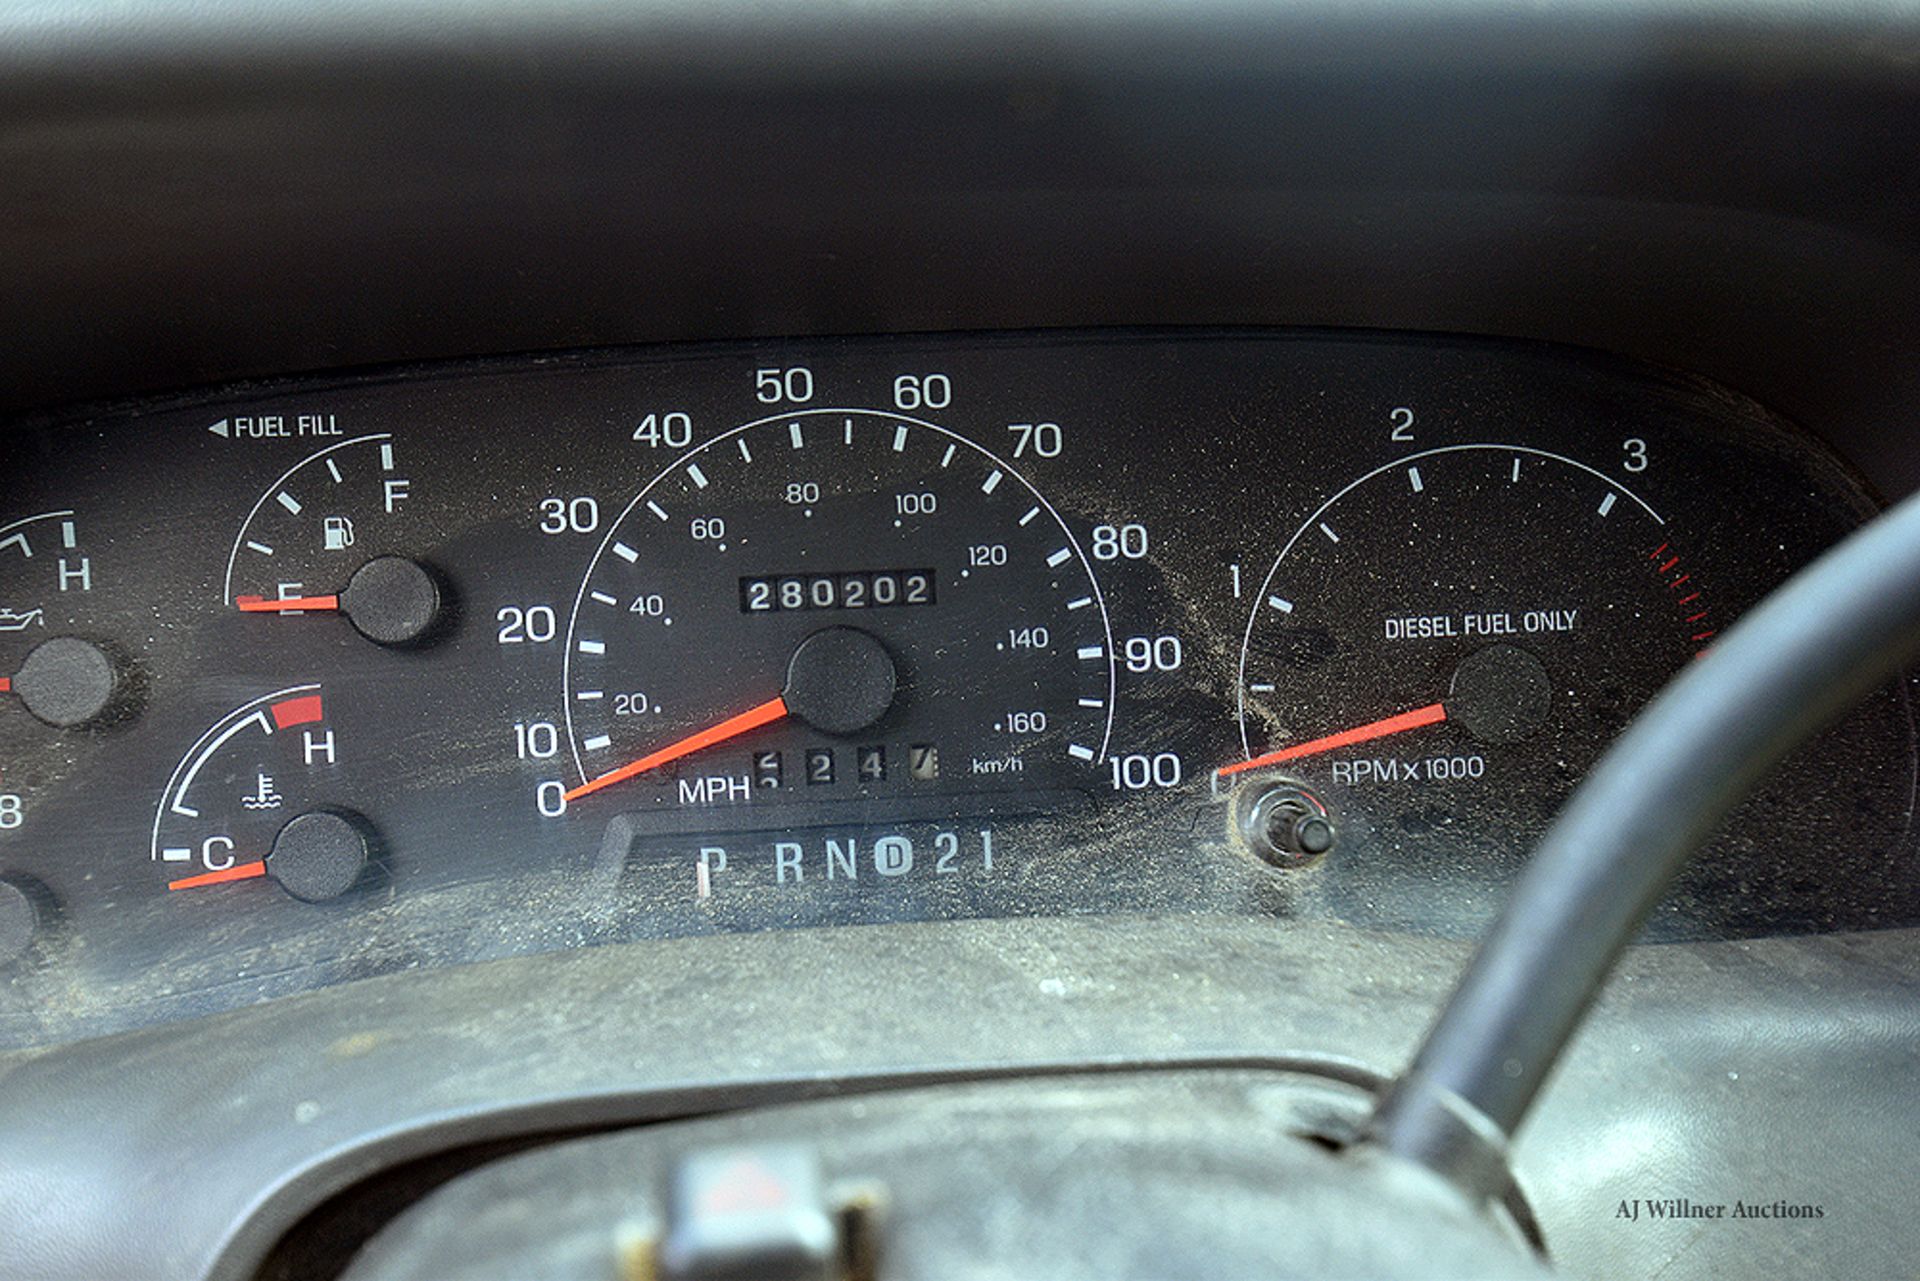 2001 Ford F-550 XL Super Duty Reg Cab Utility Truck 280,202 Miles w/ Auto Trans and 7.3L V8 Diesel - Image 4 of 8